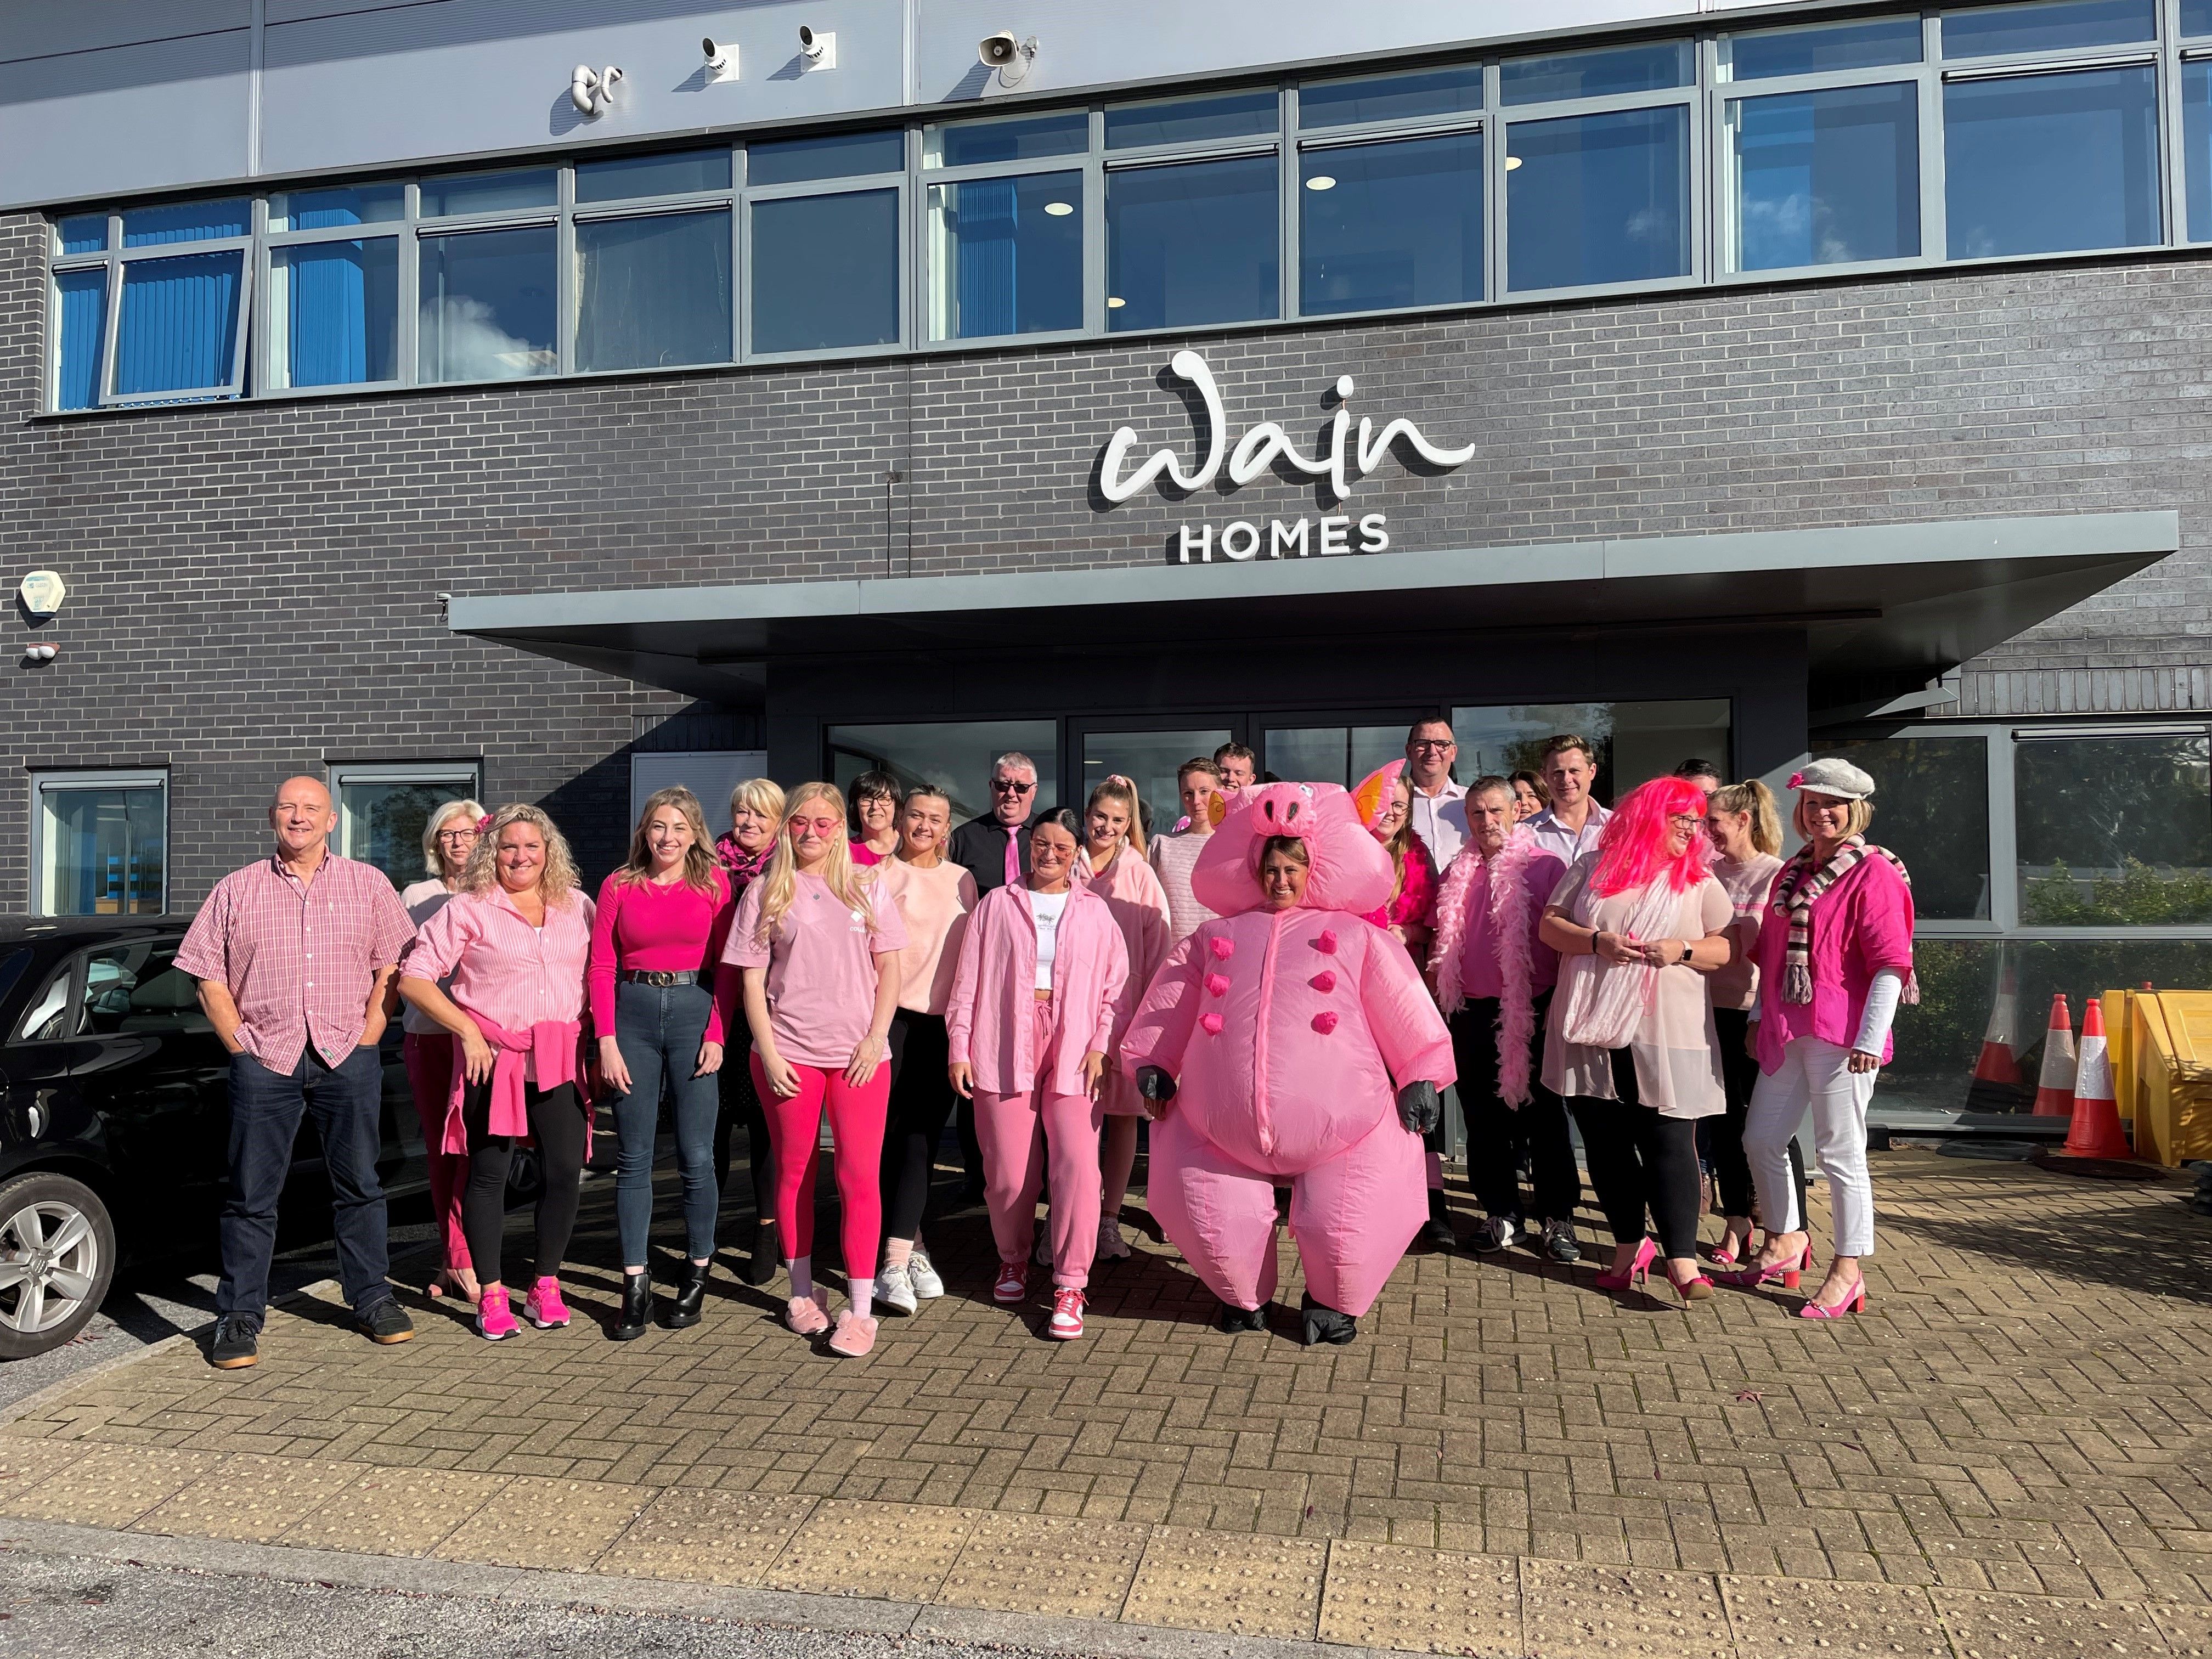 South West Team in the Pink for Charity